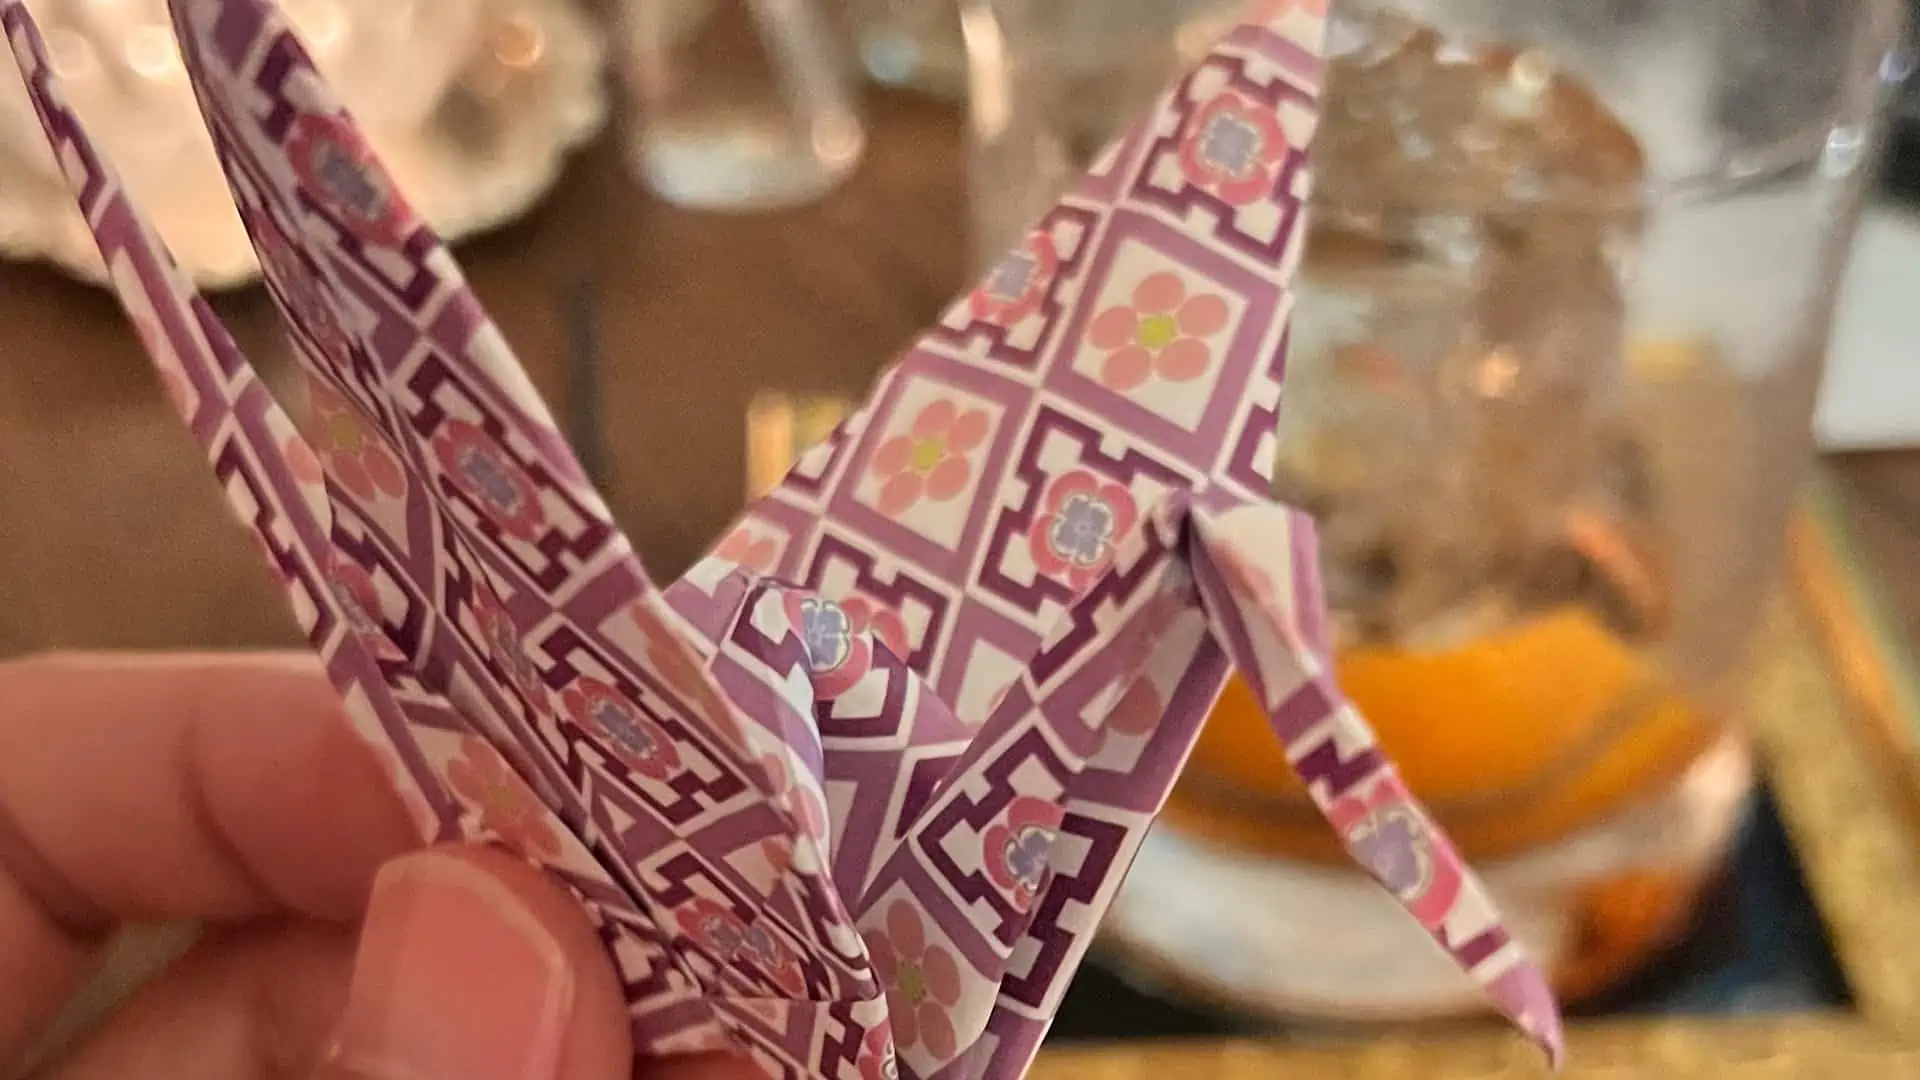 Origami of bird in front of a cocktail